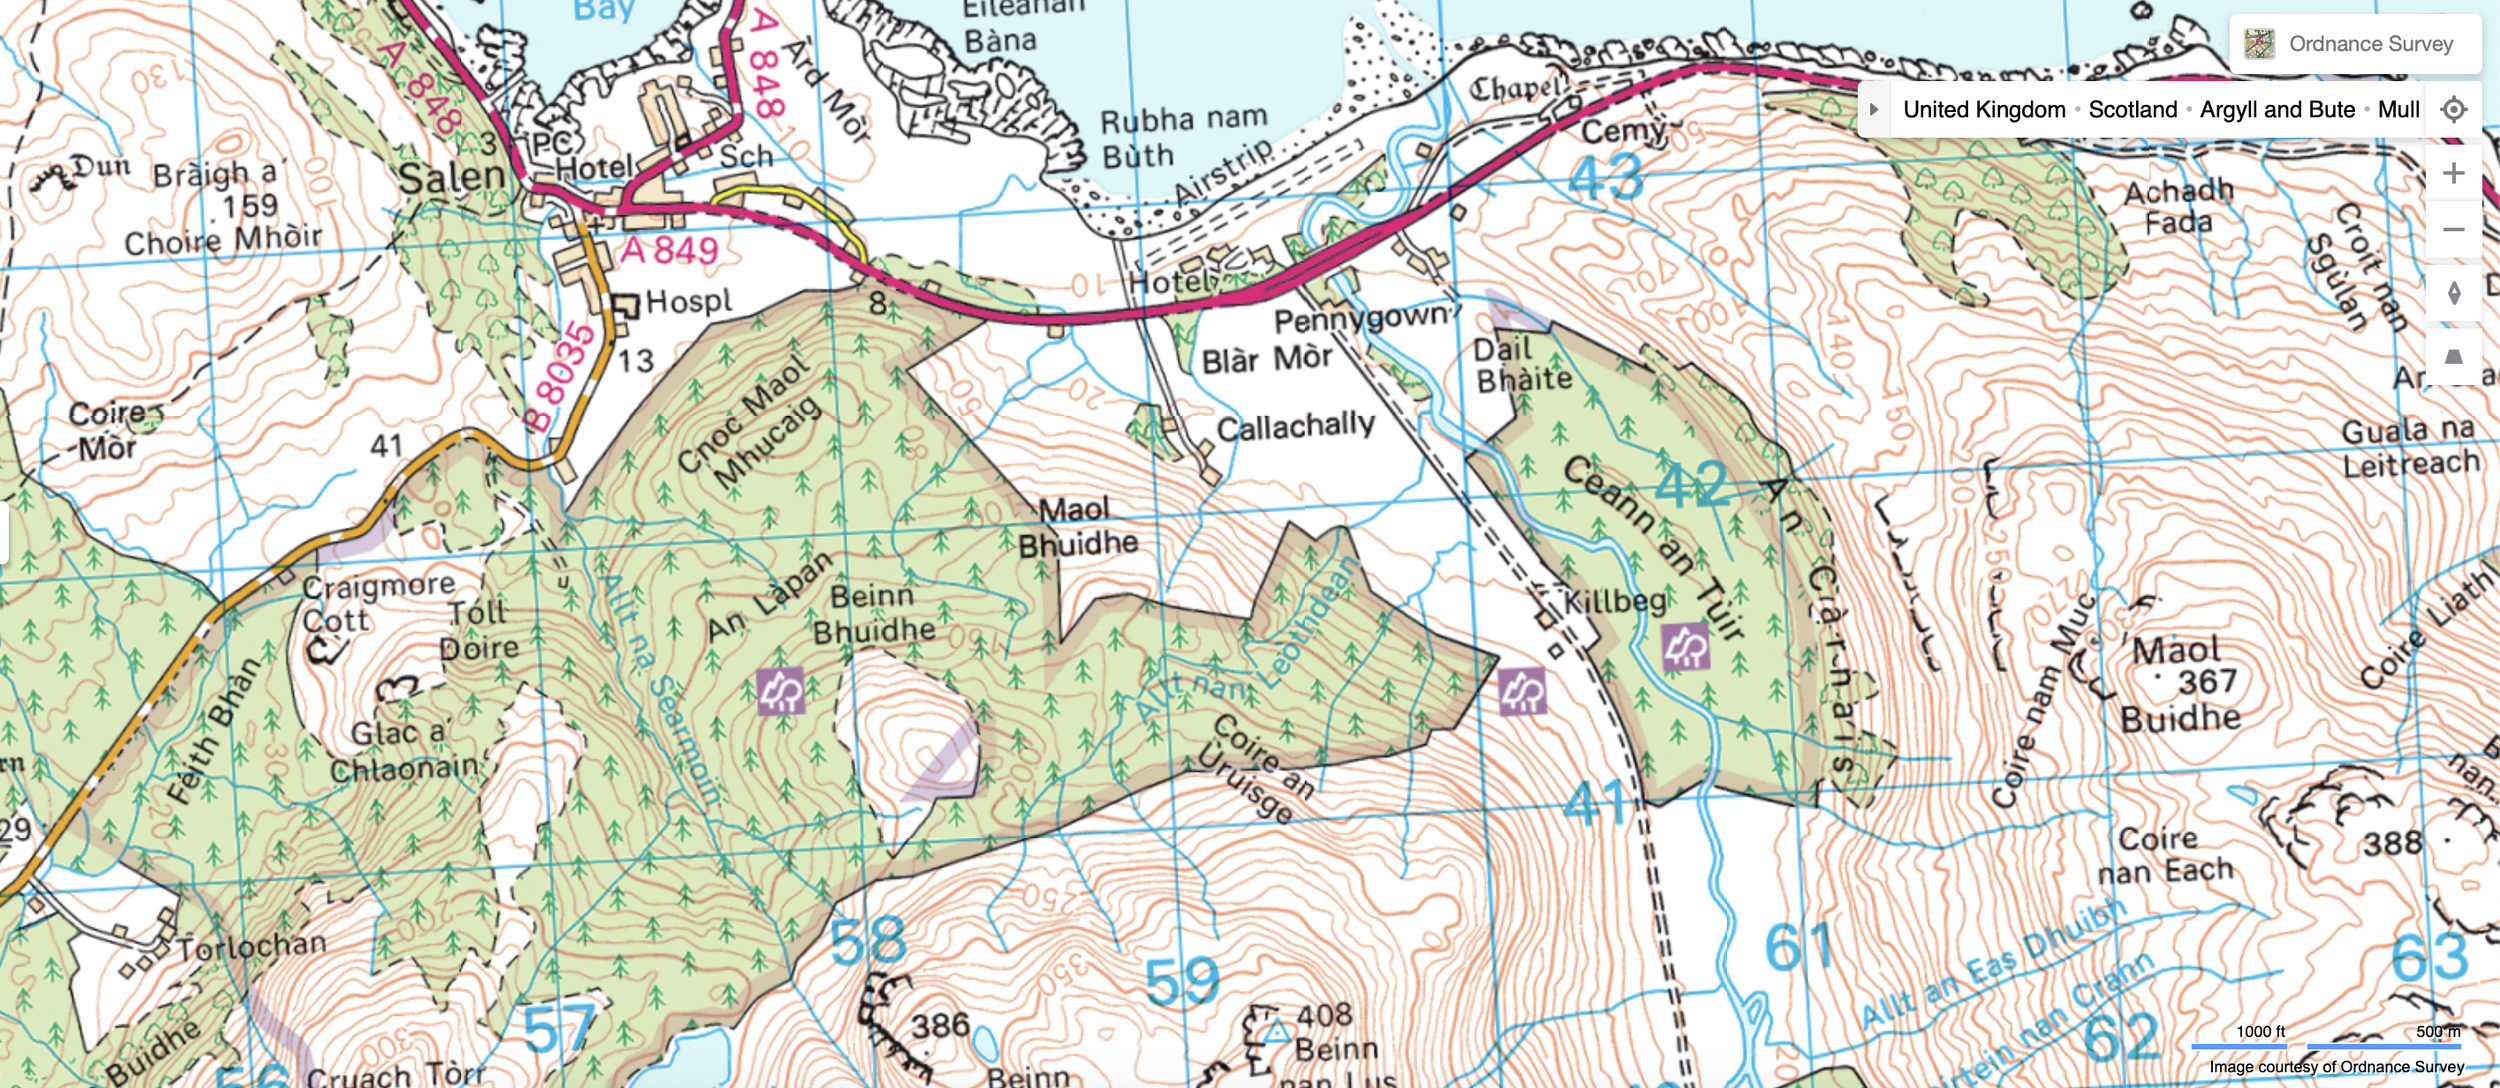  Topographical map of Argyle and Bute, Isle of Mull, Scotland 